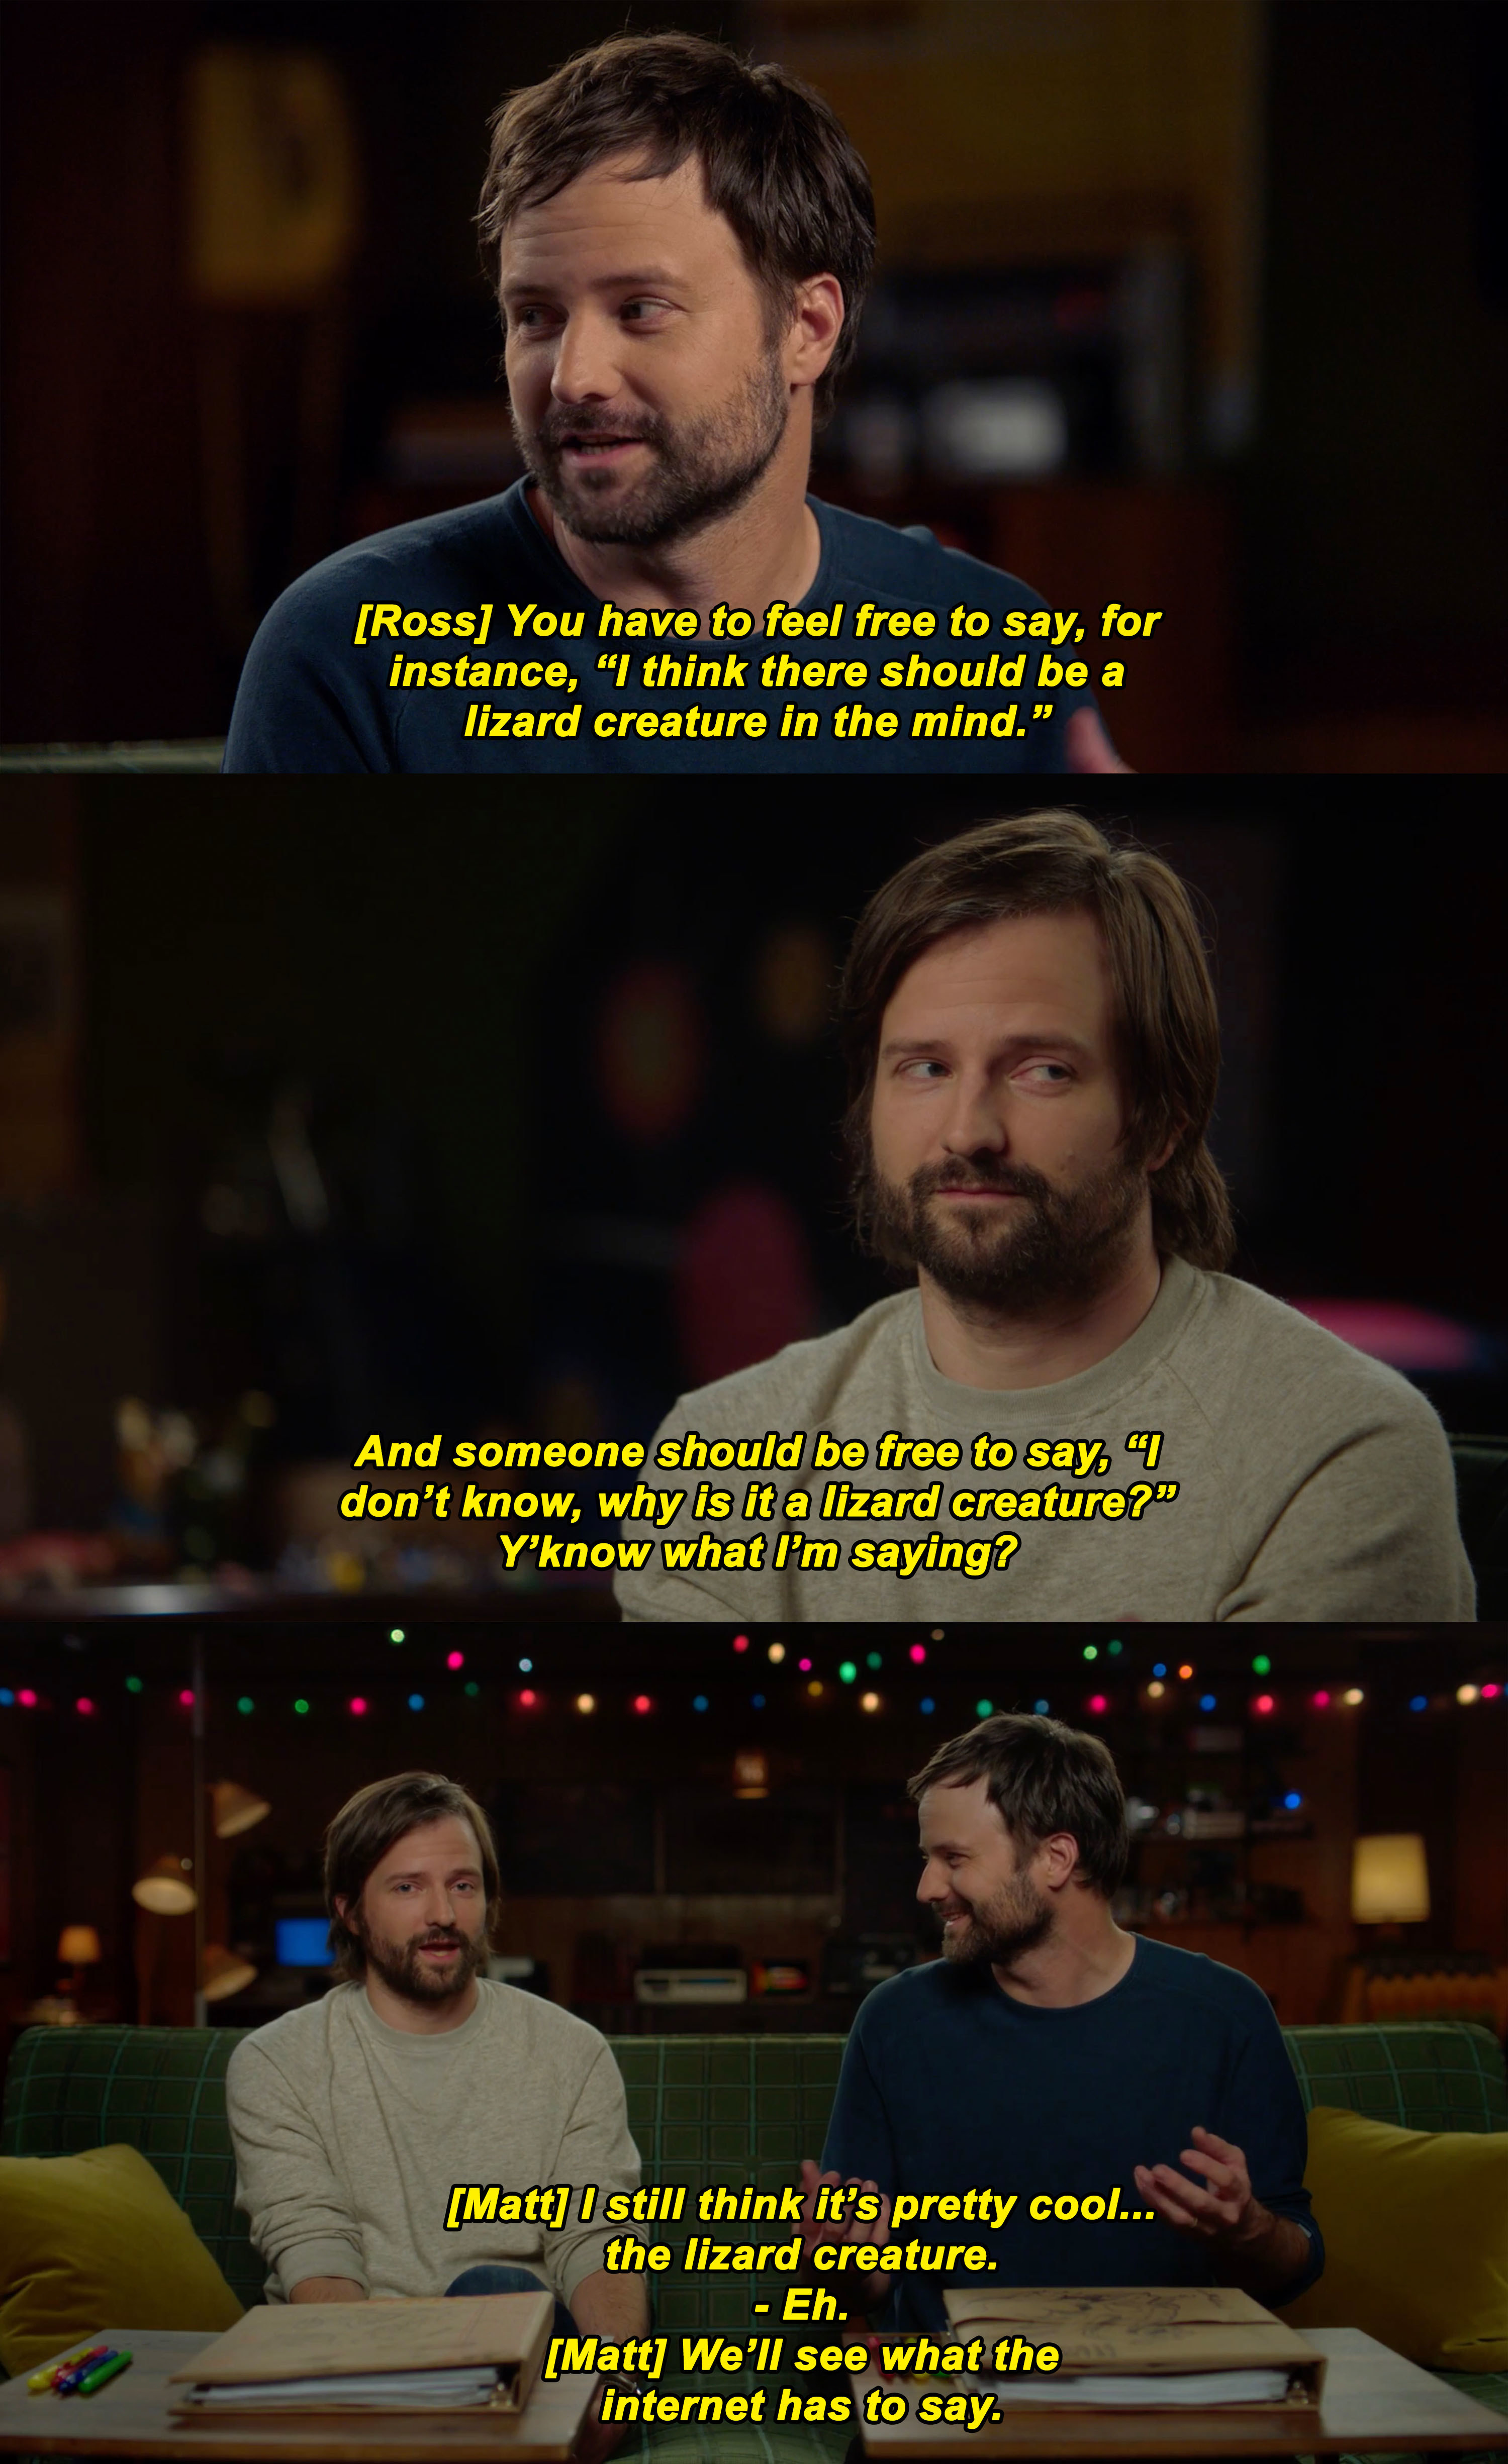 The duffer brothers